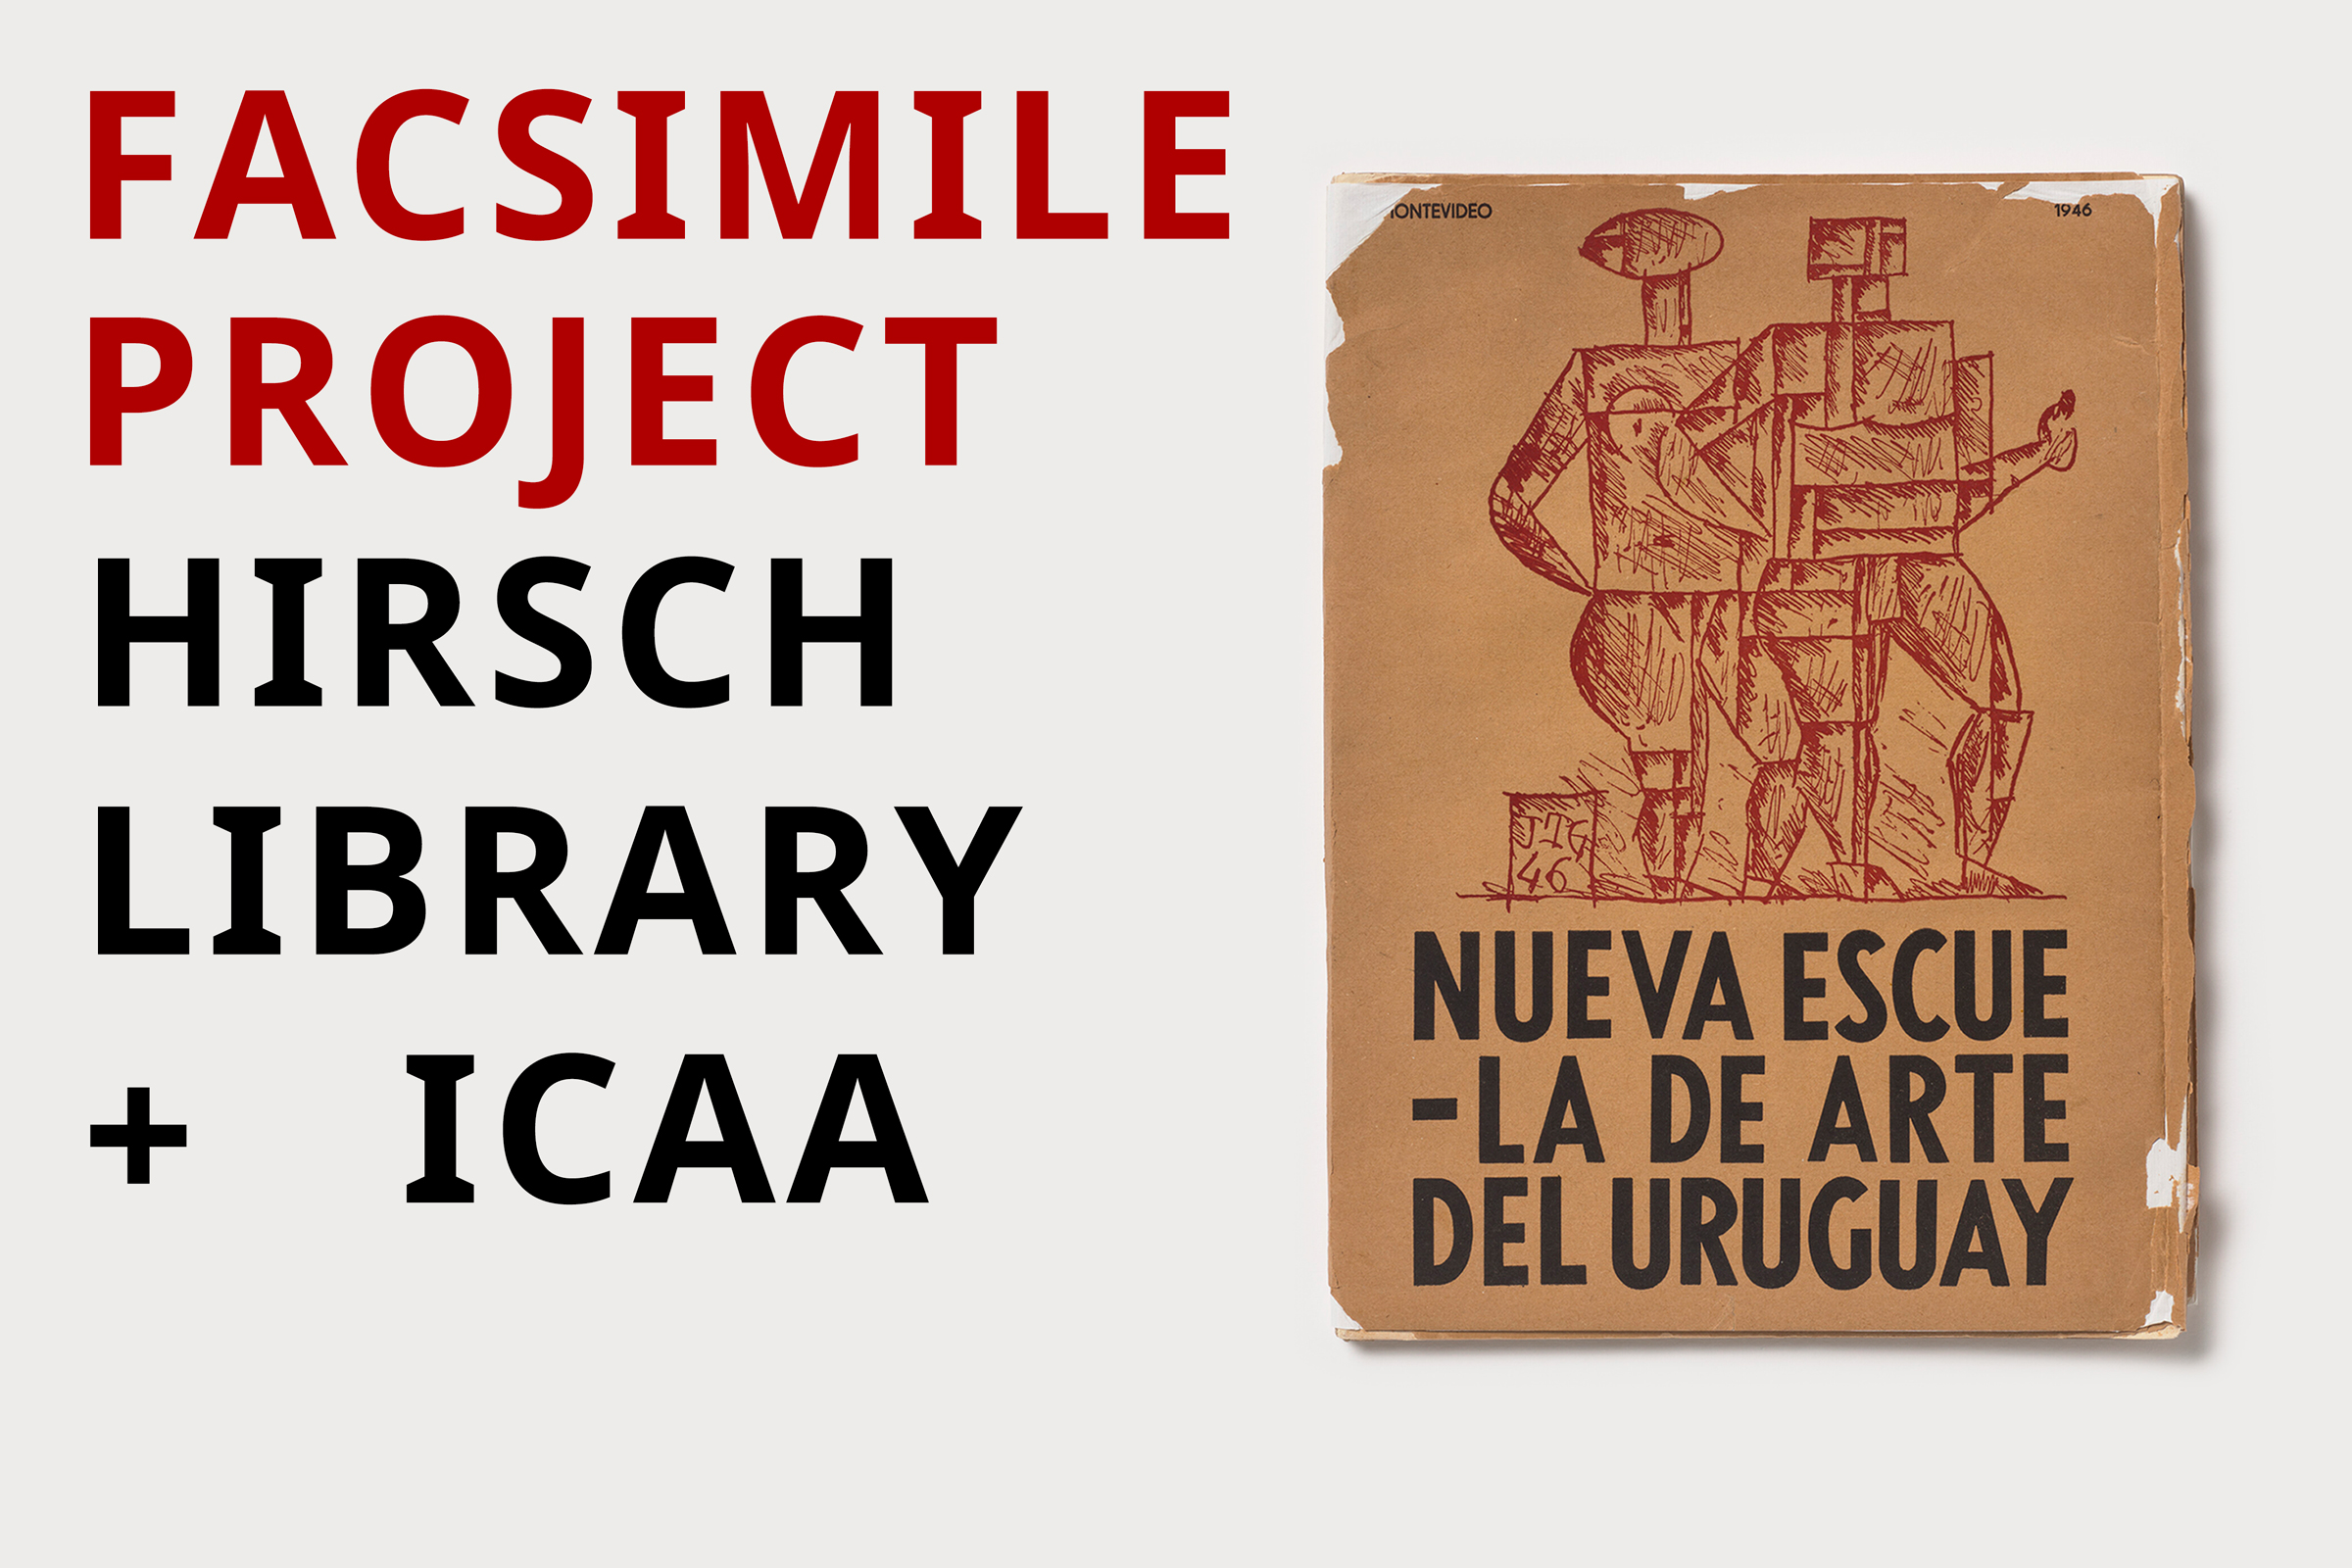 <section>
<p><strong><em>Papelitos:&nbsp;</em>ICAA-Hirsch Library Facsimile Project: Latin American Rare Books, Periodicals, and Ephemera in the&nbsp;Nancy and Rich Kinder Building</strong></p>
</section>
